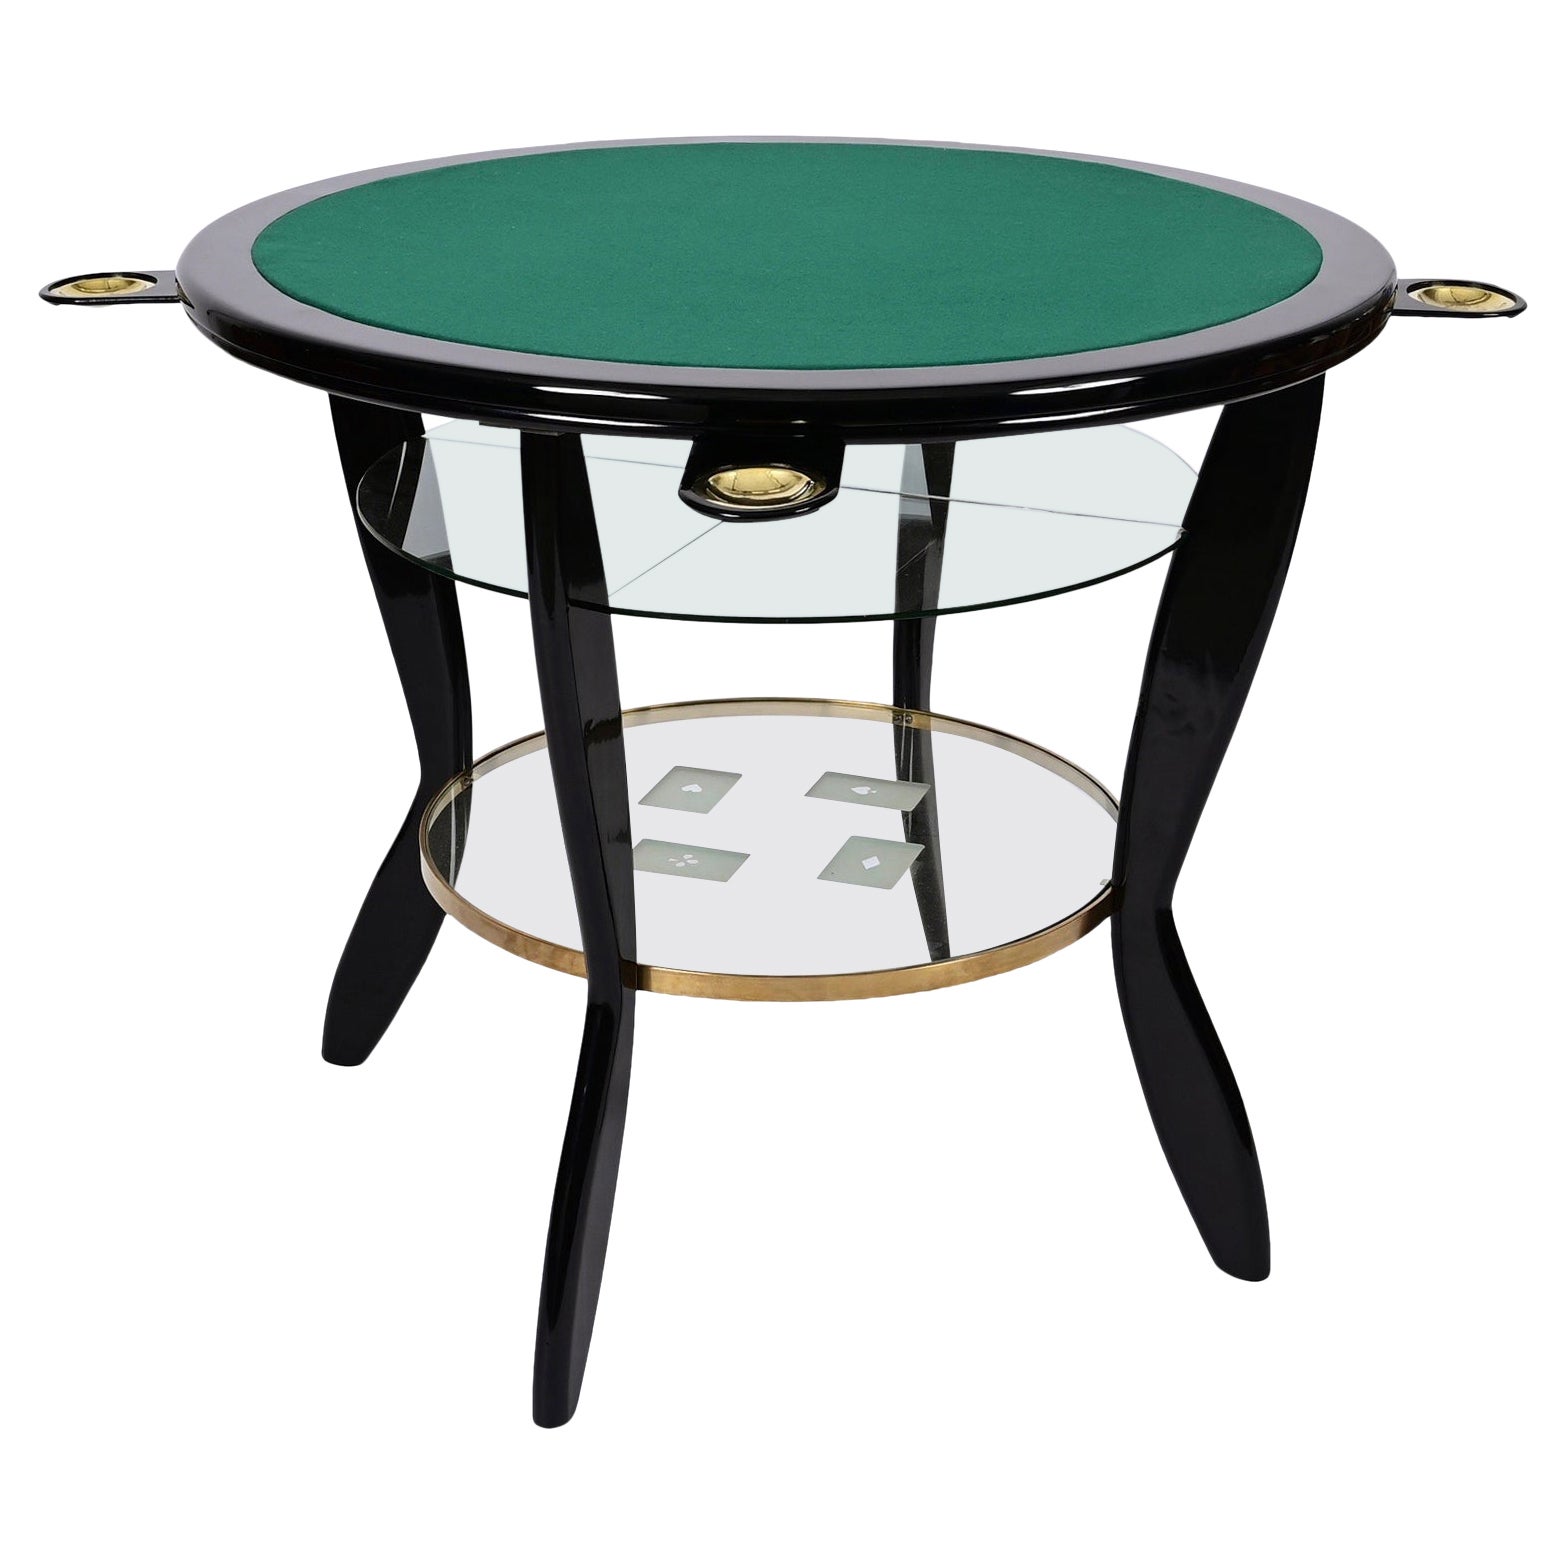 Gio Ponti Style Ebonized Beech and Brass Italian Game Table with Glass, 1950s